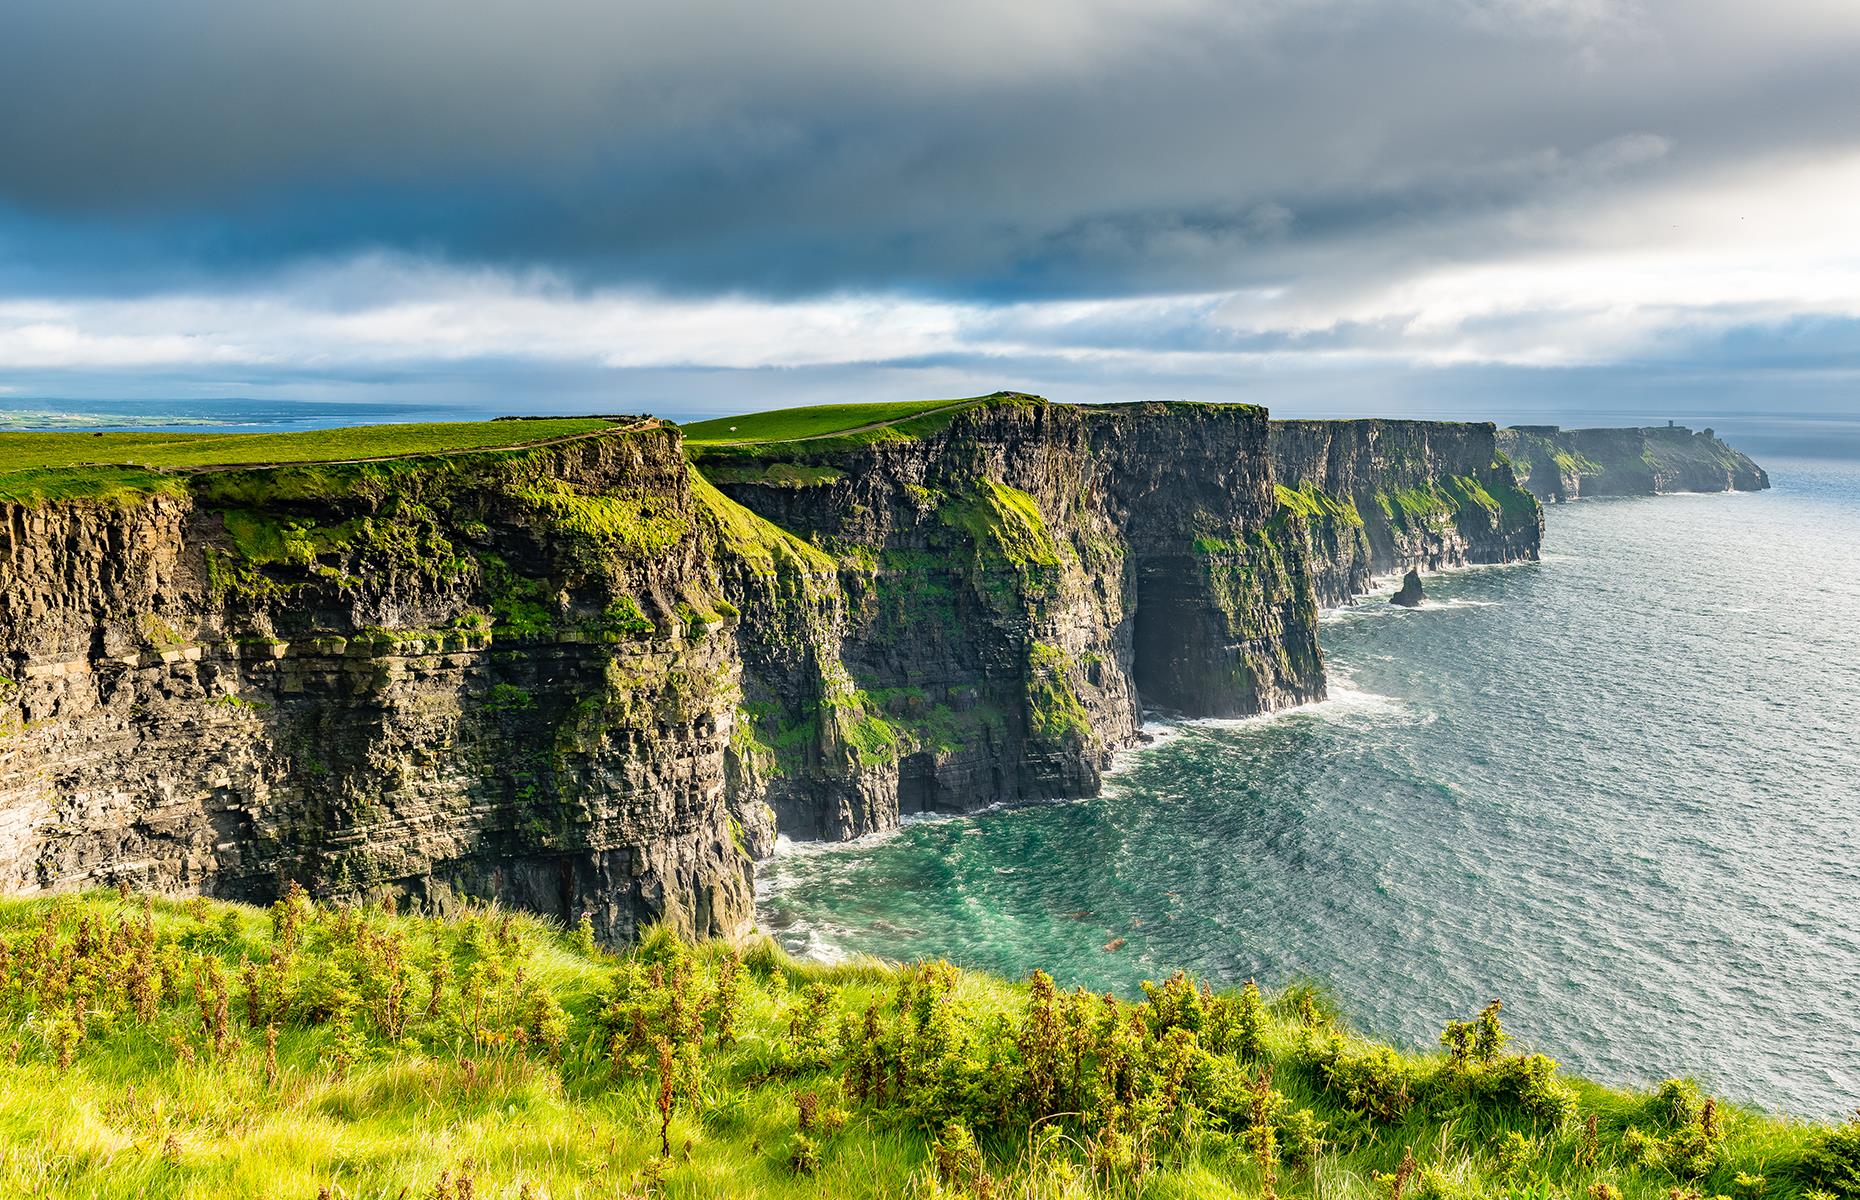 <p>Soaring 700 feet (214m) above the Atlantic Ocean and stretching some nine miles (14km) along Ireland’s rugged West County Clare Coast, there’s more than enough wow factor to mesmerise the whole family at the <a href="https://www.cliffsofmoher.ie/">Cliffs of Moher</a>. There are safe, paved pathways and telescopes with which to admire the views, seabirds and rare wildflowers, plus a multi-award-winning Visitor Centre (built into the hillside like a Hobbit’s cave) with exhibitions and interactive screens for children to learn about the animals and birds. Kids under 12 also go free. </p>